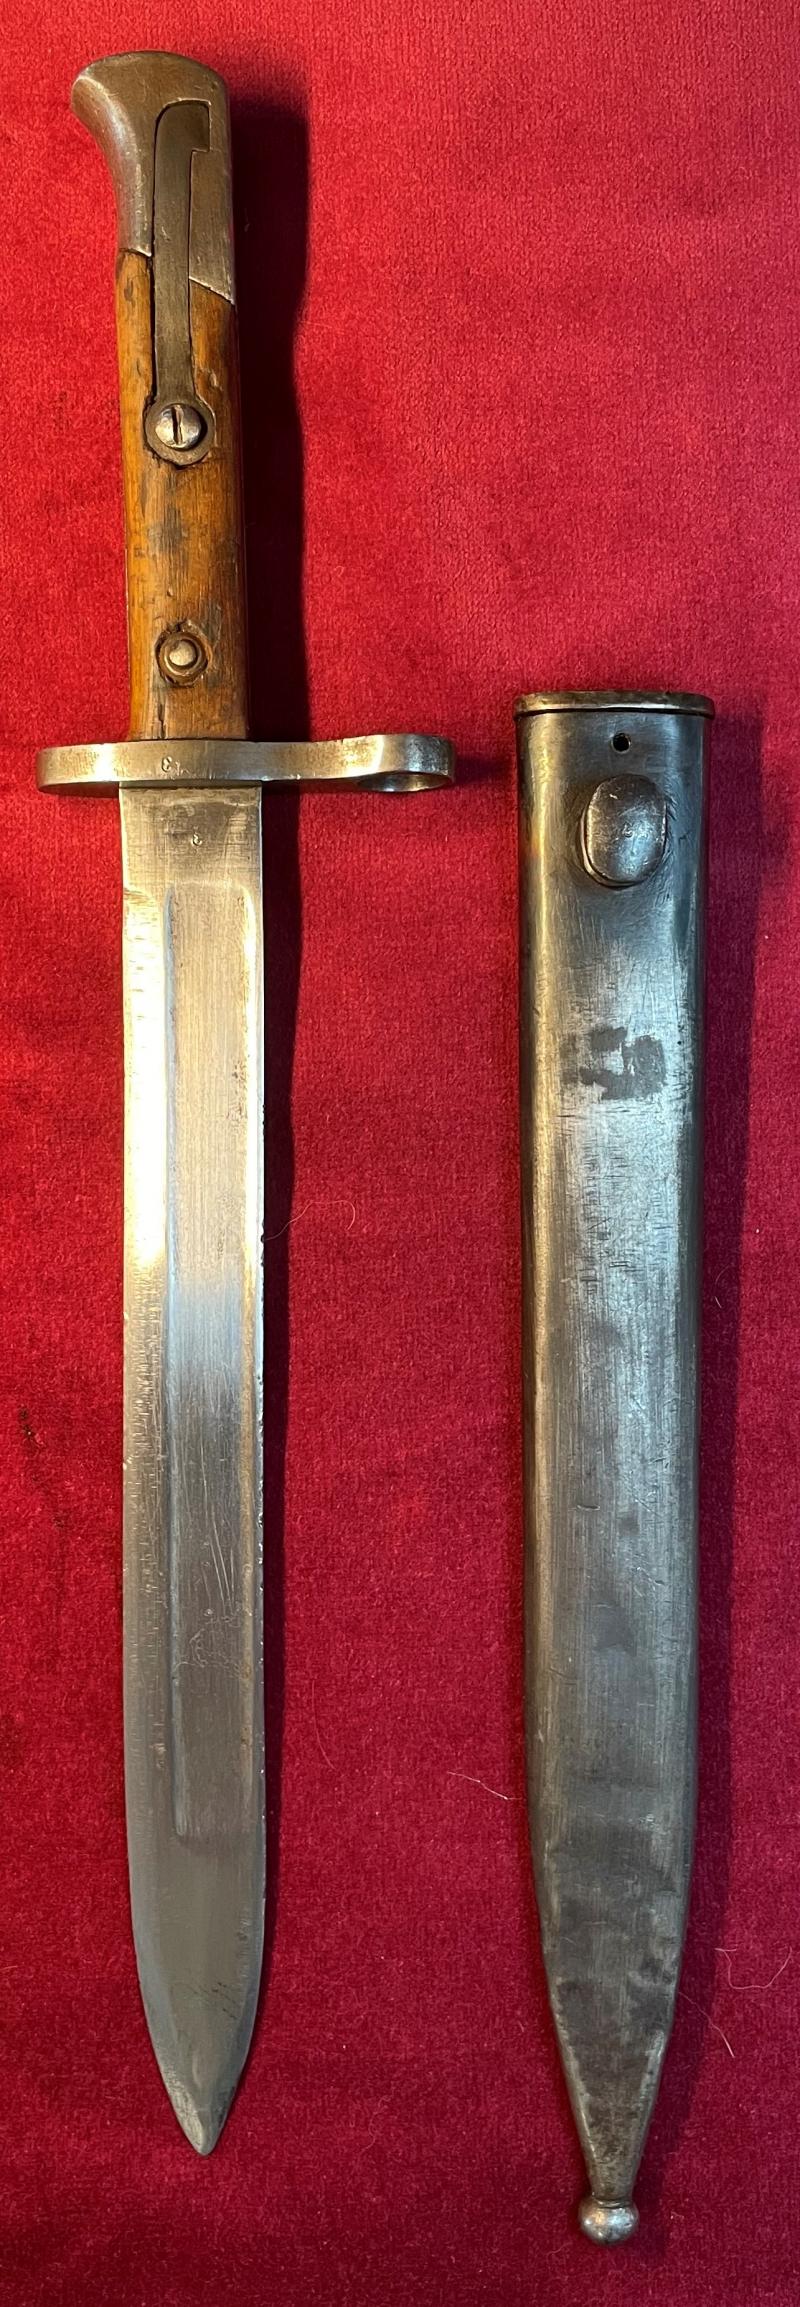 Early Turkish M1935 External leaf spring bayonet - matching numbers on all parts!